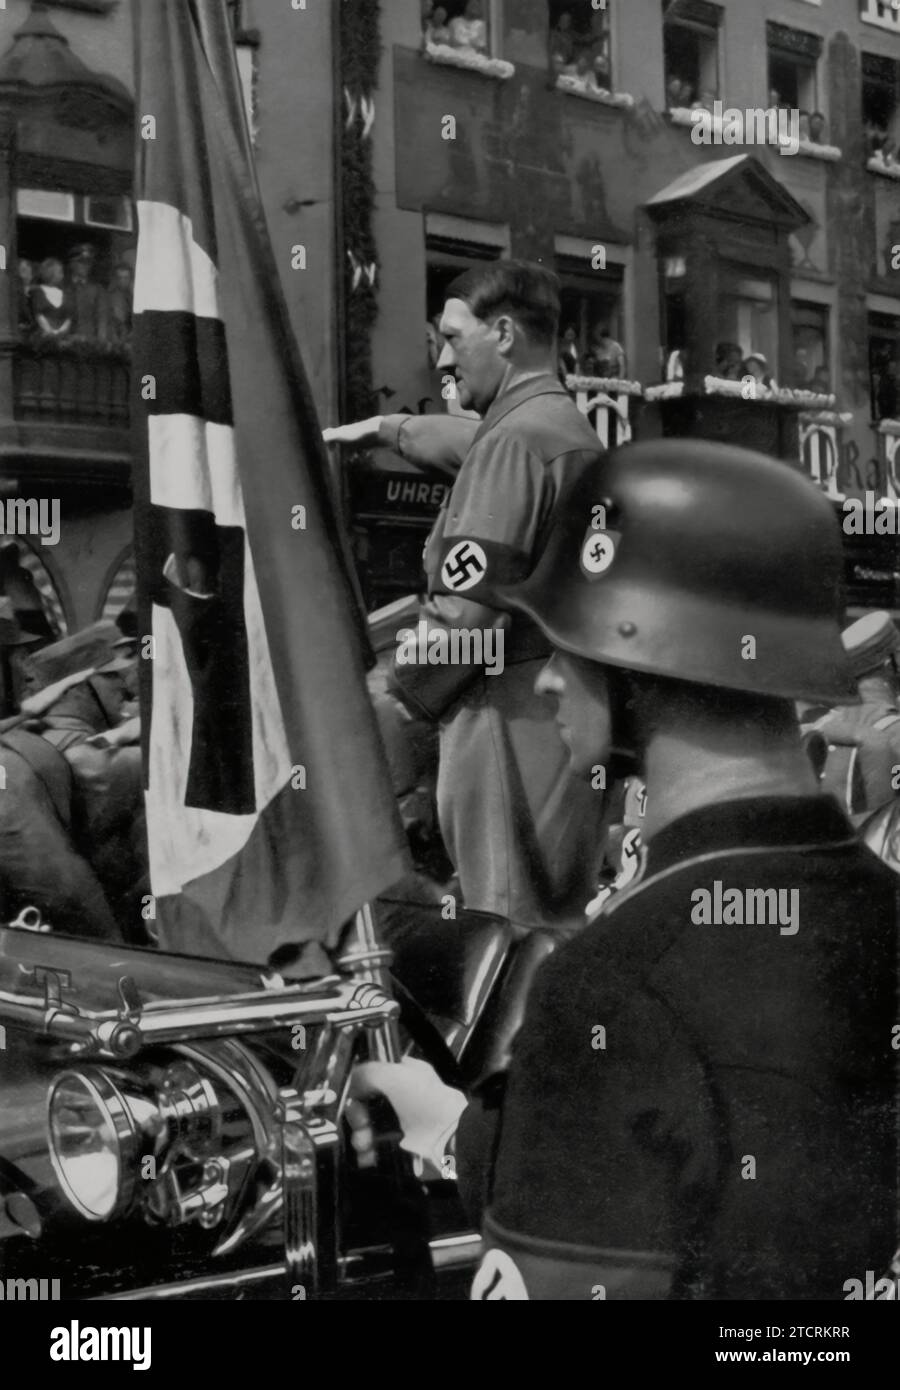 At the Nuremberg Rally, Adolf Hitler is seen saluting the 'Blutfahne' (Blood Flag) from 1923, a revered symbol in Nazi lore. This flag, stained with the blood of party members from the Beer Hall Putsch, was used to consecrate new flags. Hitler's salute to the Blutfahne underscores the regime's veneration of its early struggles and the sacrifices of its members, symbolizing a continuous thread of loyalty and martyrdom within the Nazi movement. Stock Photo